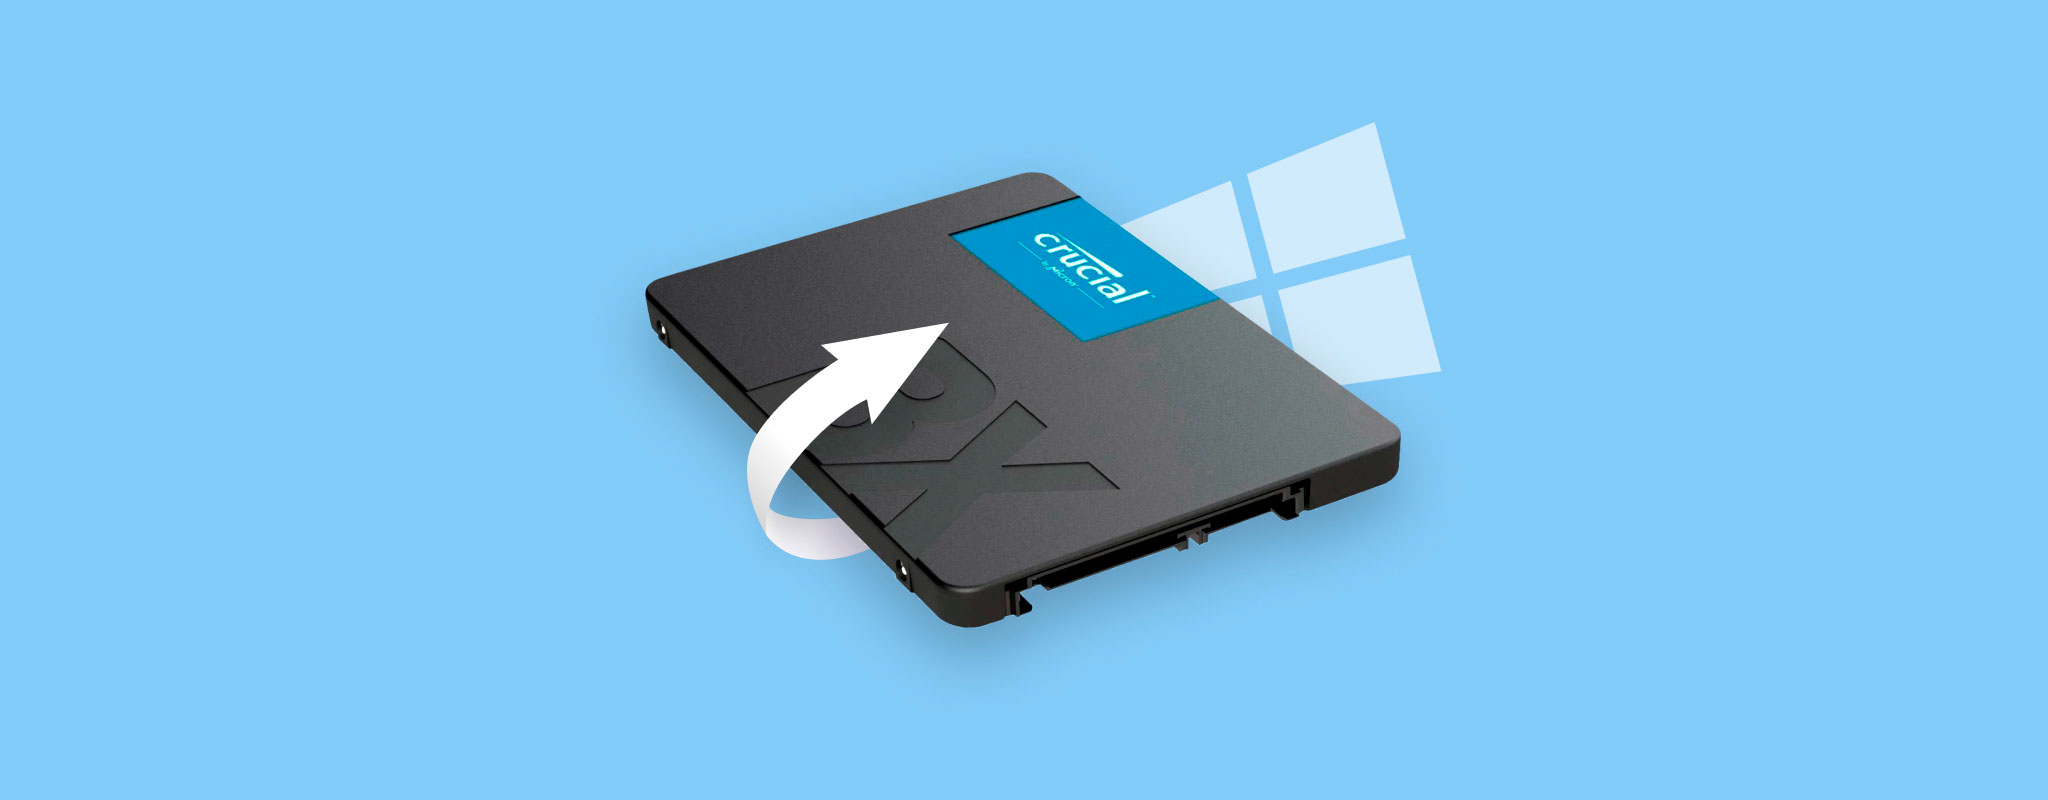 recover files from crucial ssd